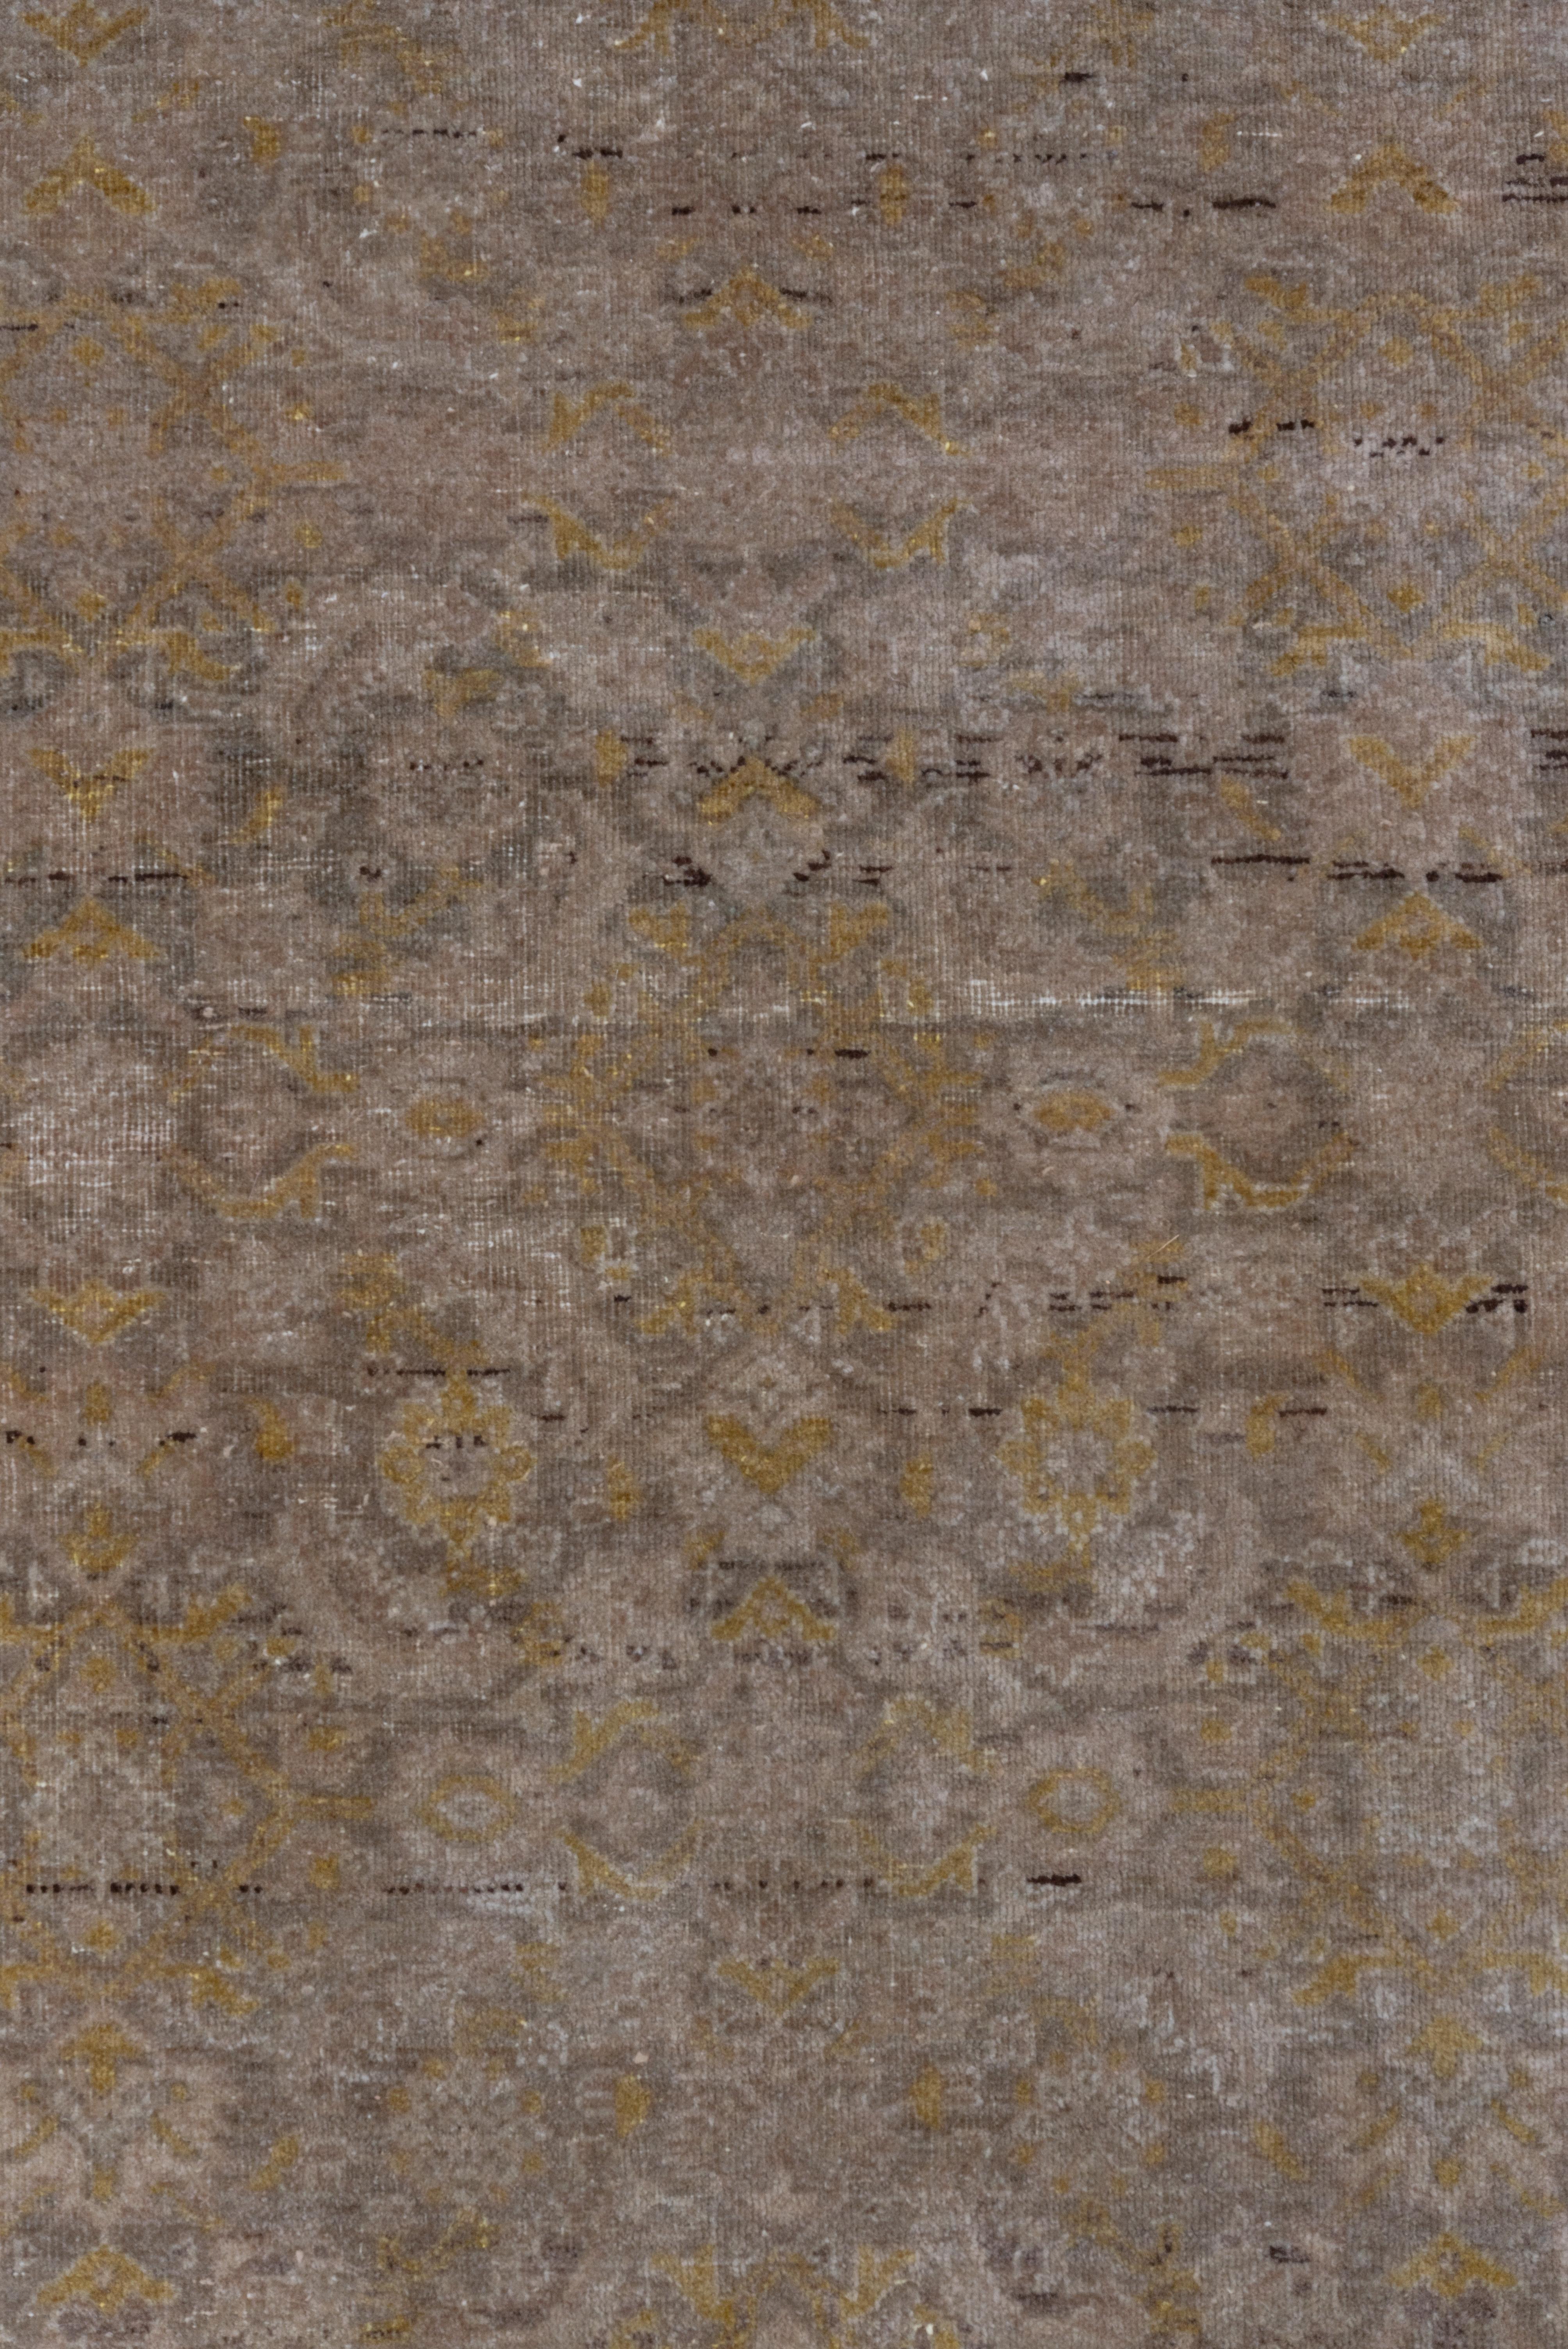 Early 20th Century Antique Turkish Sivas Rug, Herati Design, Light Brown Field with Gold Tones